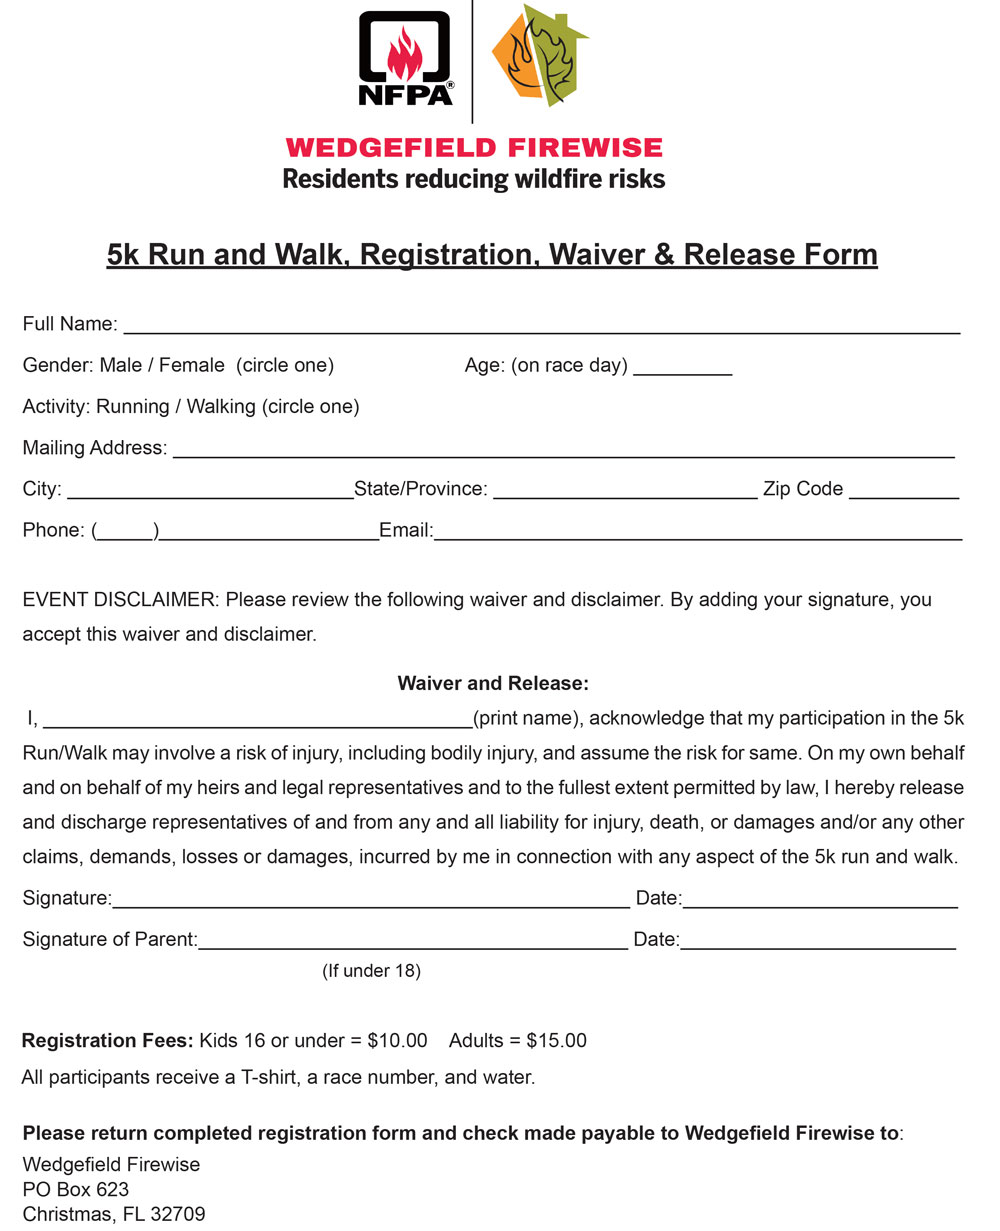 Wedgefield Firewise 5k Run and Walk Registration, Waiver & Release Form